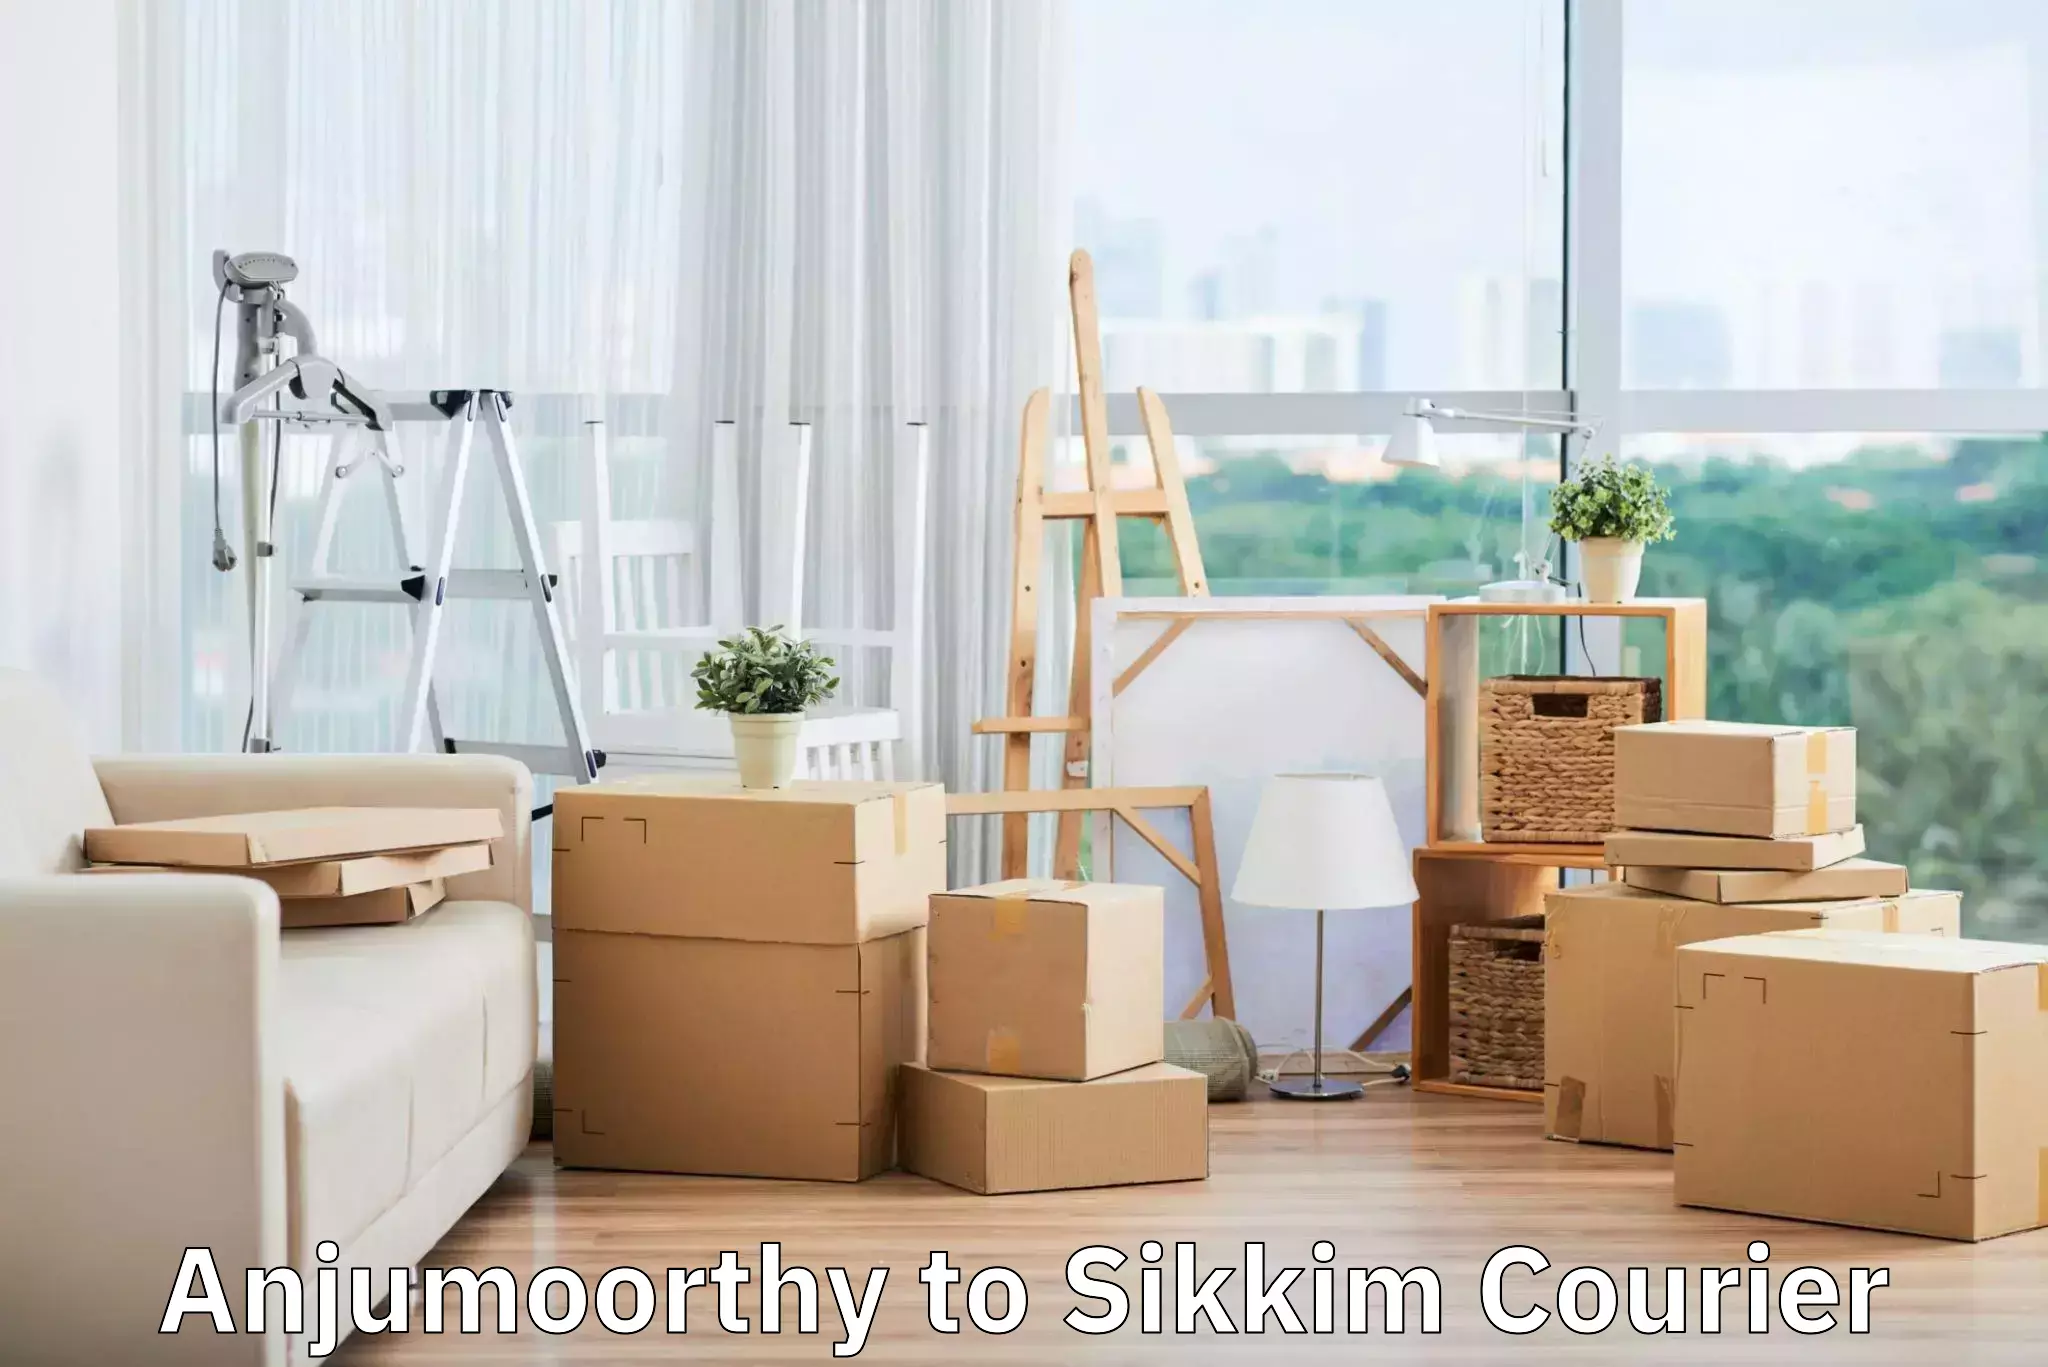 Online luggage shipping booking Anjumoorthy to East Sikkim